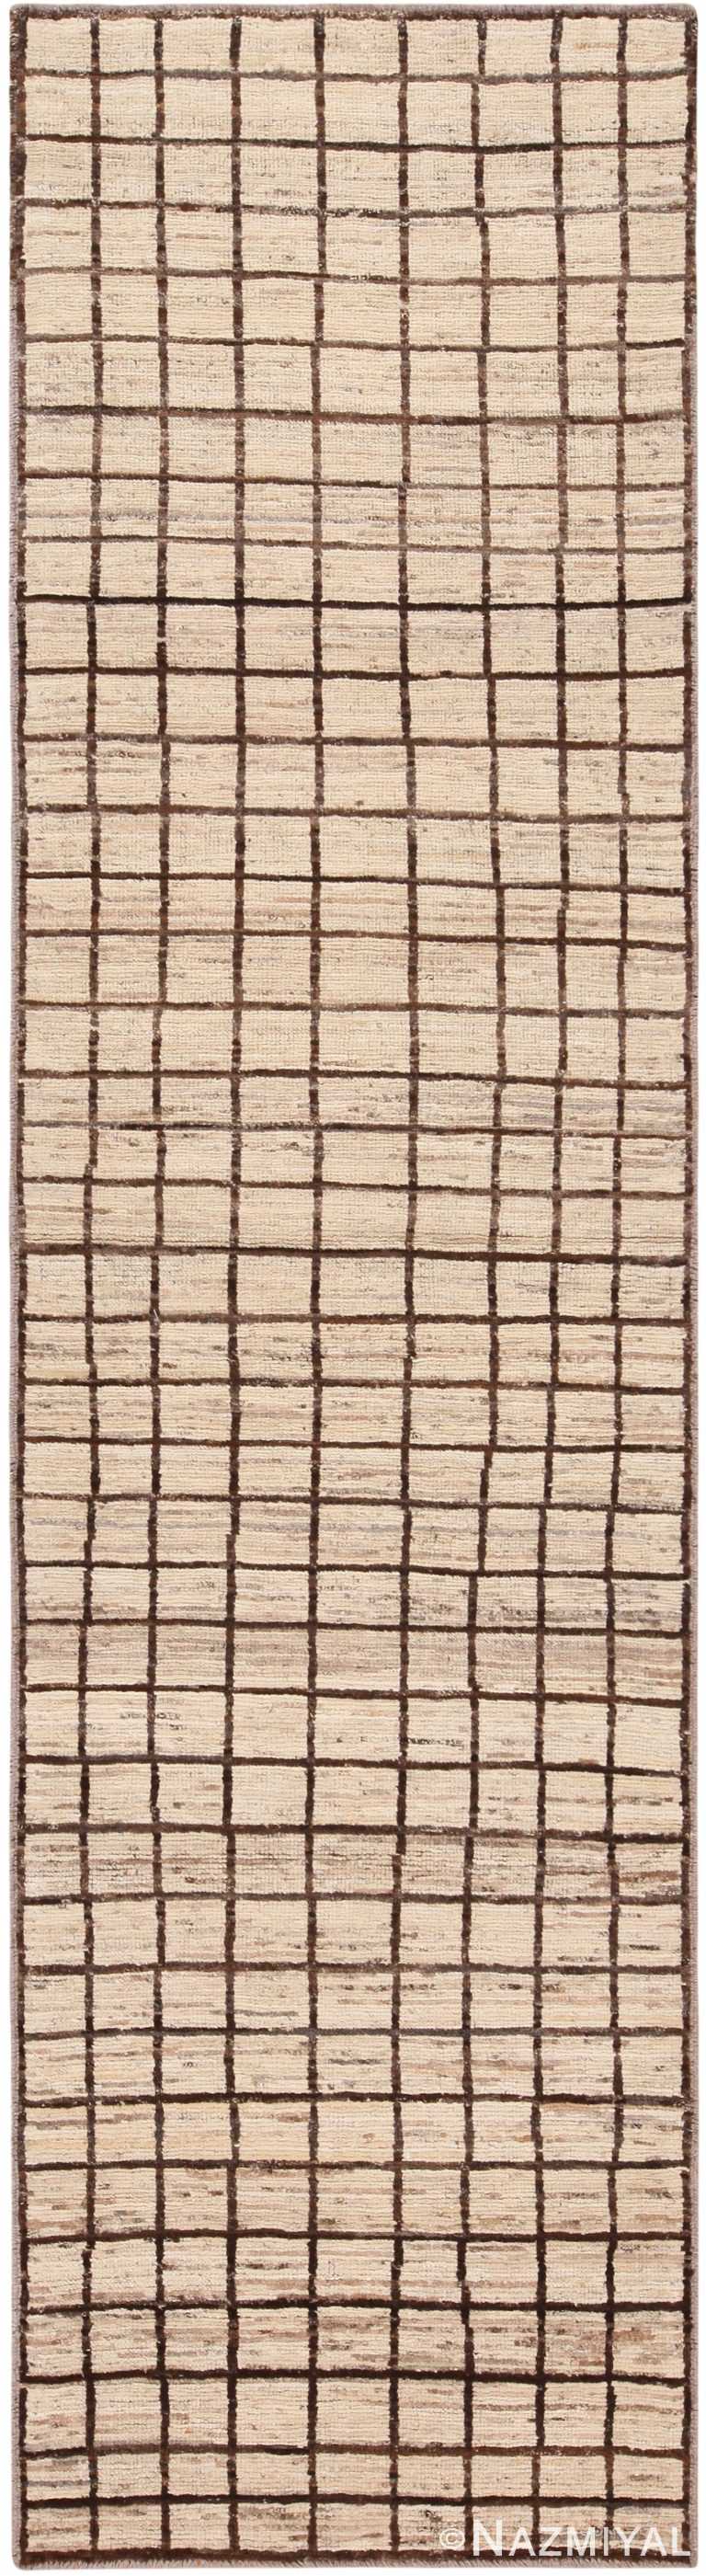 Moroccan Style Geometric Modern Distressed Runner Rug 60936 by Nazmiyal Antique Rugs